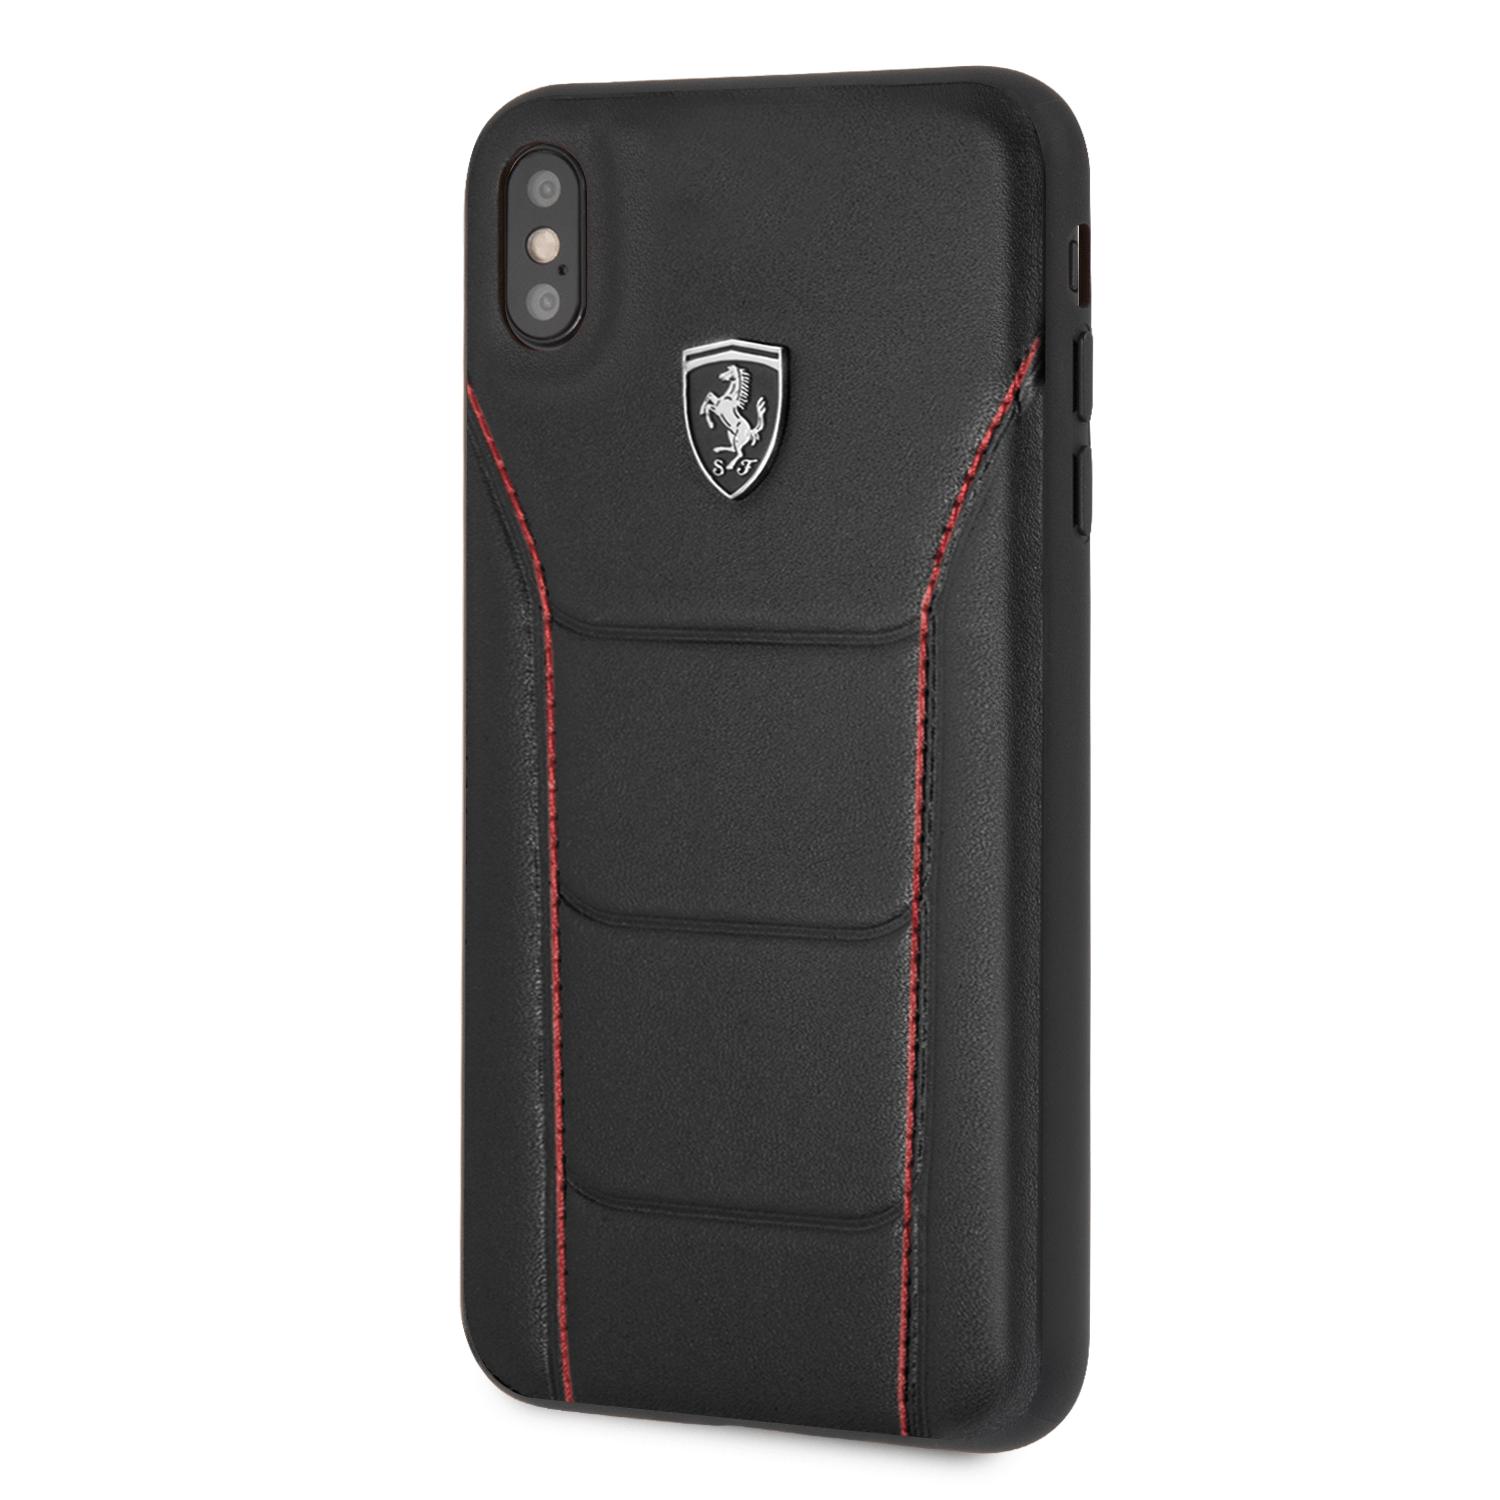 Experience deluxe style protection with our genuine leather case, designed in the iconic Ferrari Auto fashion you know and love